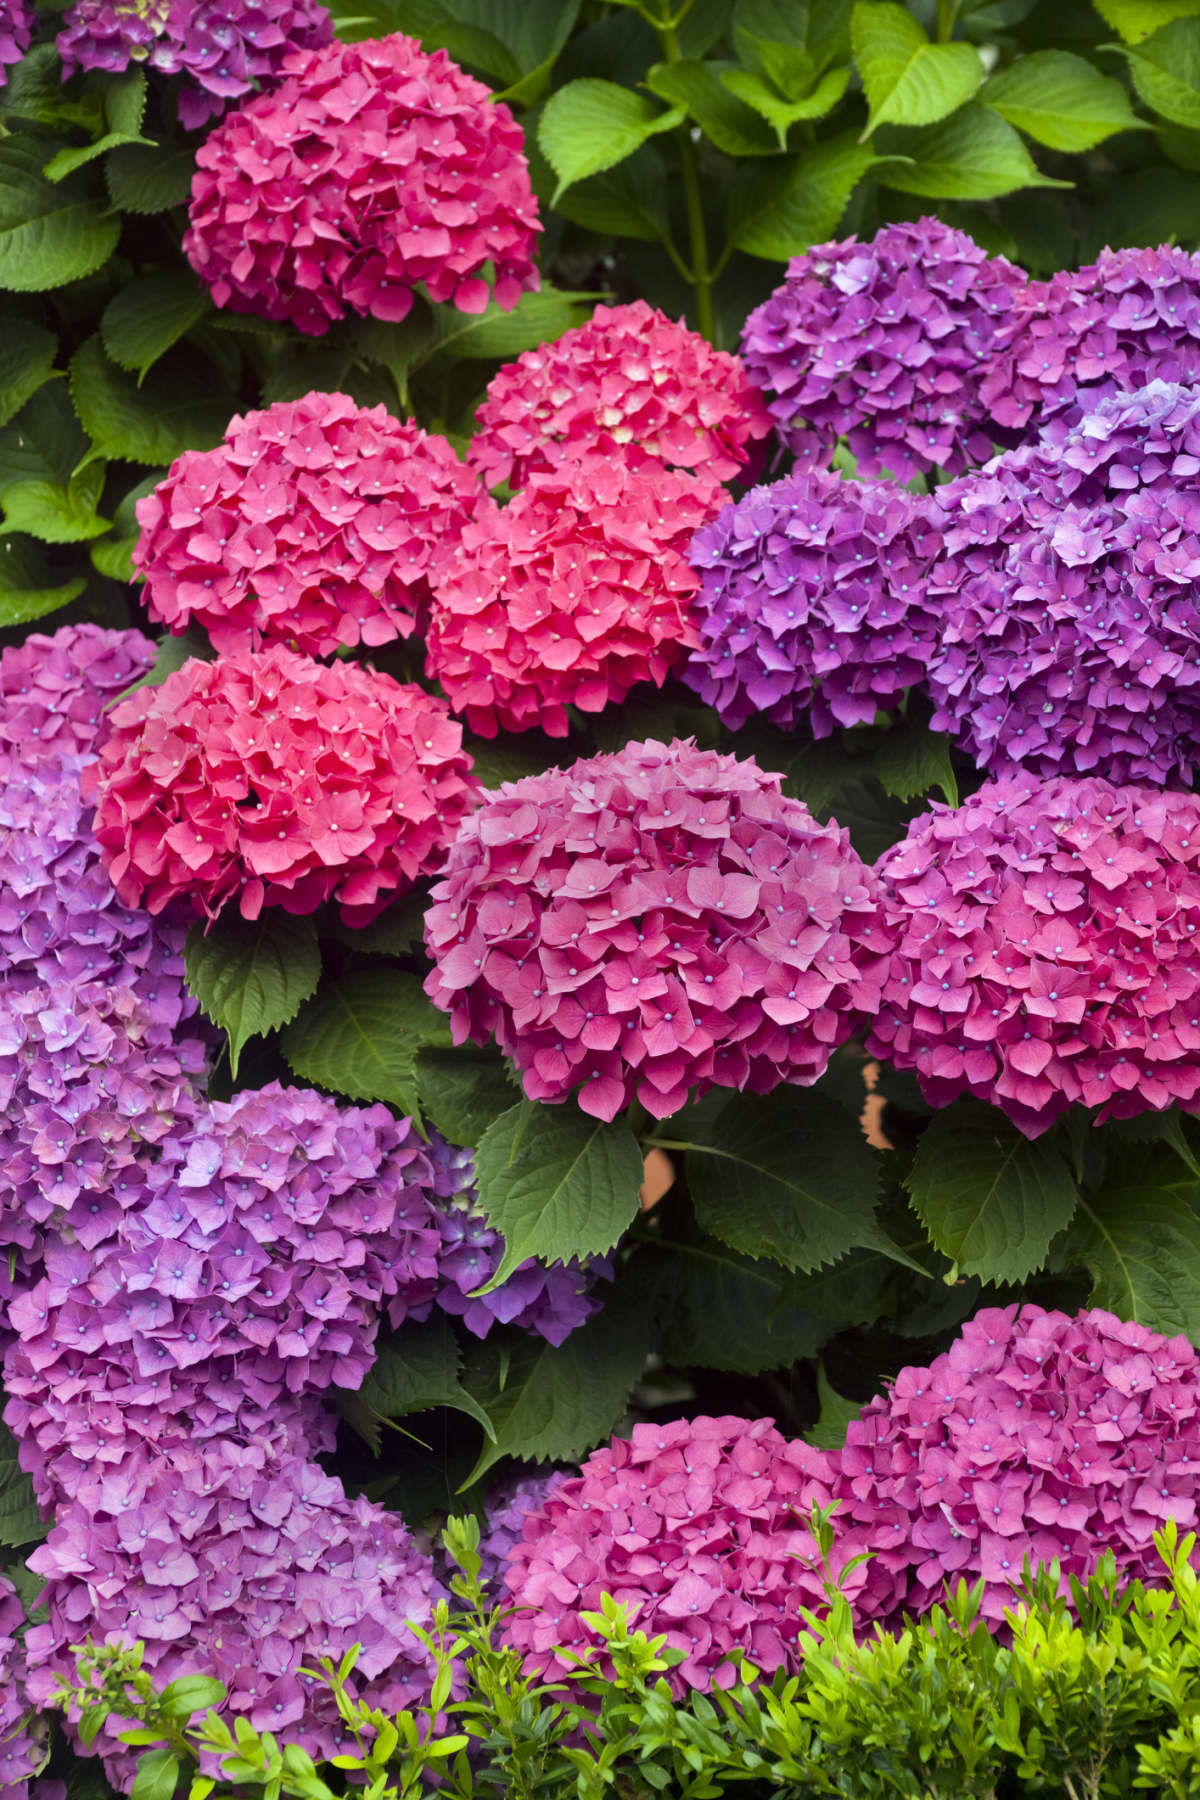 Pink and purple hydrangeas in the sunlight, green leaves, full frame view.  Garden in Ribeira Sacra, Galicia, Spain.